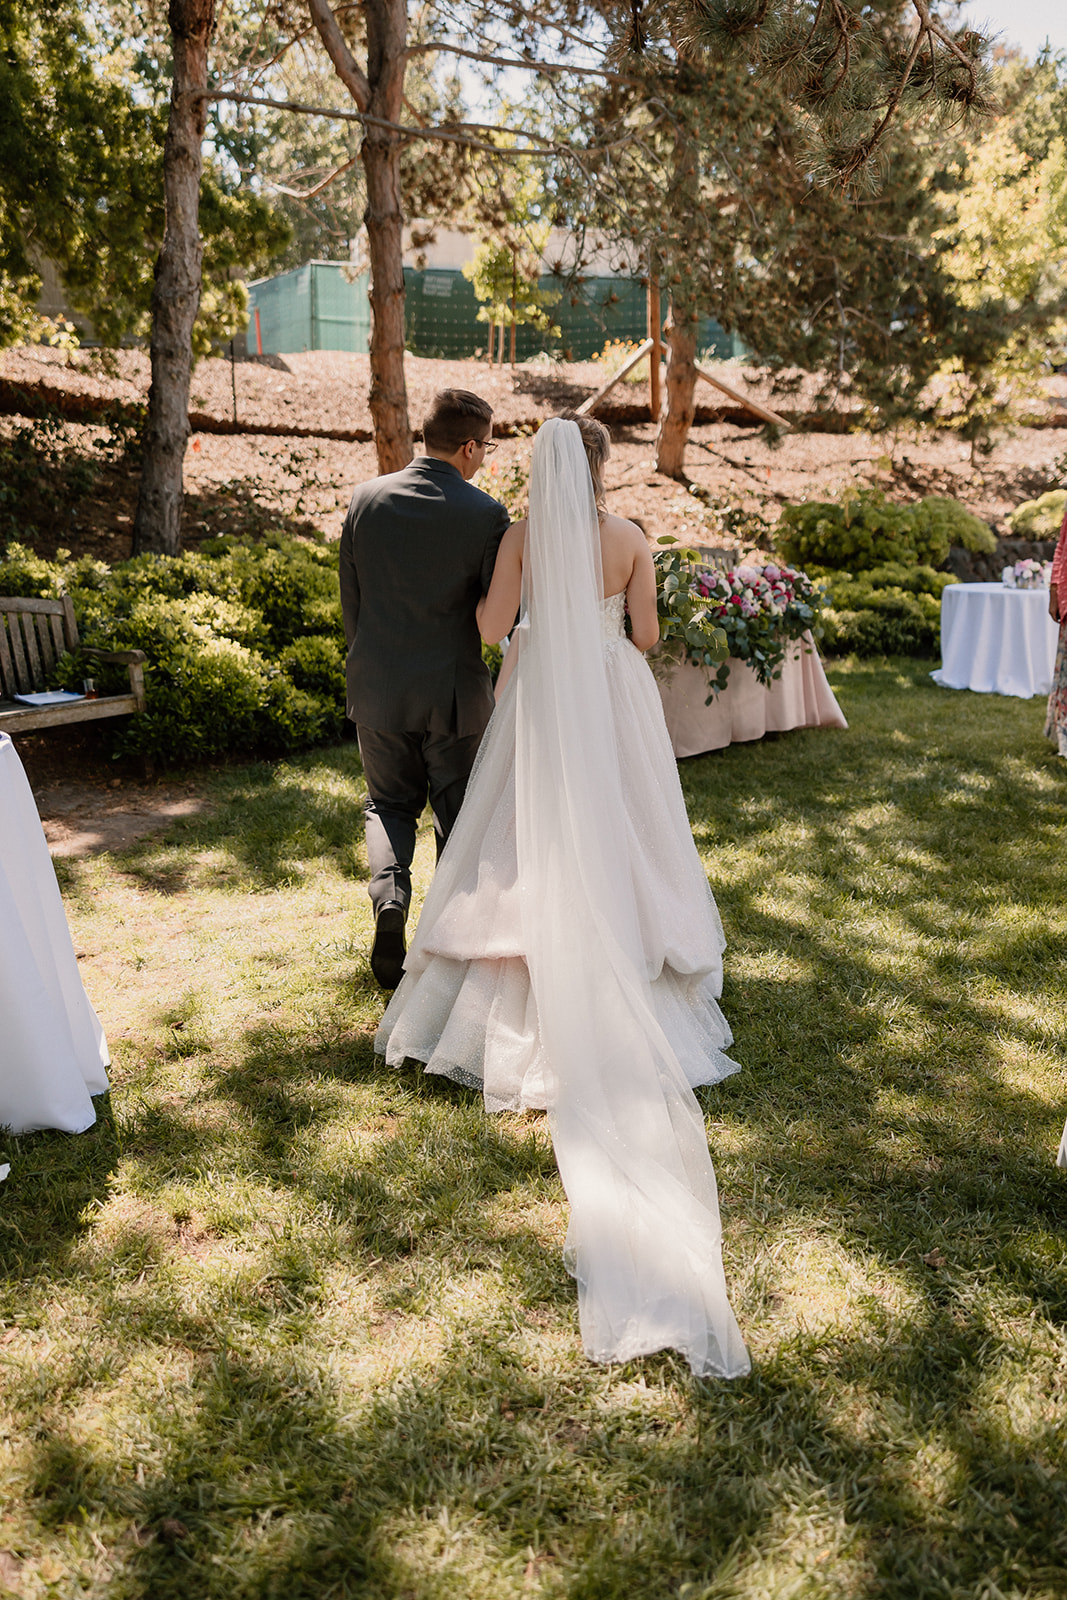 A bride and groom smiling and walking together outdoors through an open gate, surrounded by greenery and sunlight.